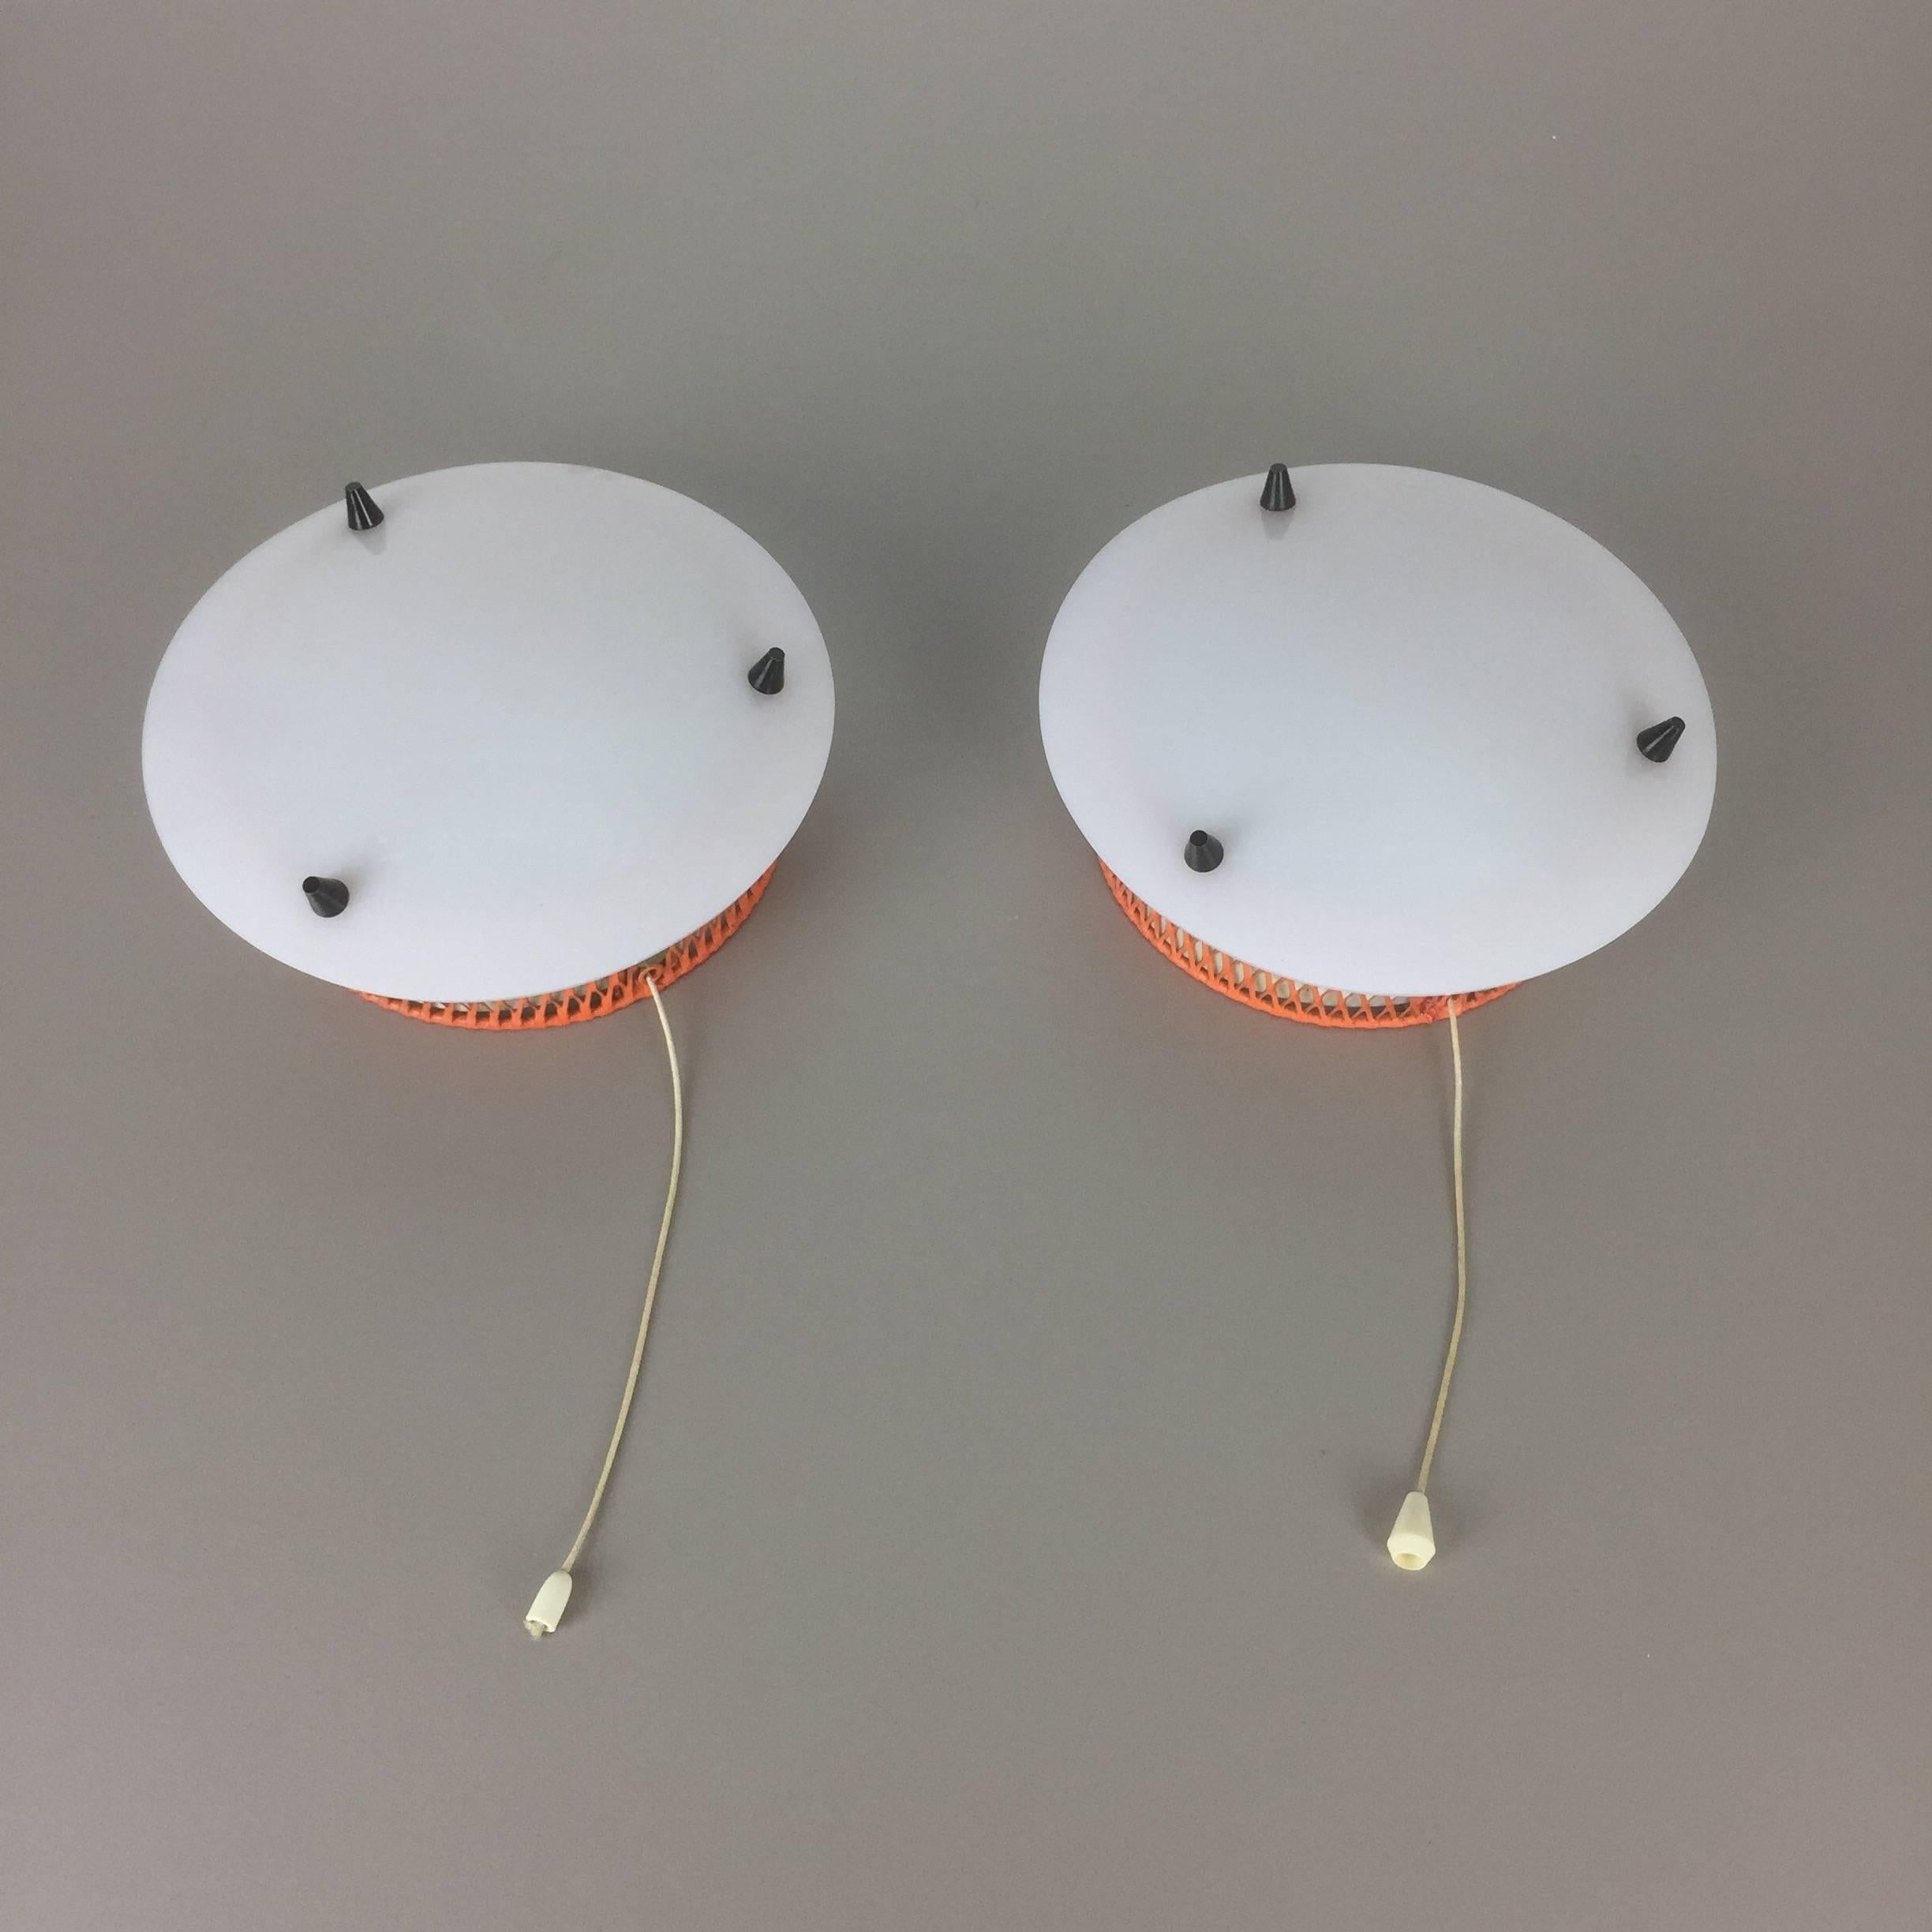 Set of Two Stilnovo Style Acryl and Metal Sconces Wall Lights, Italy, 1950s For Sale 2